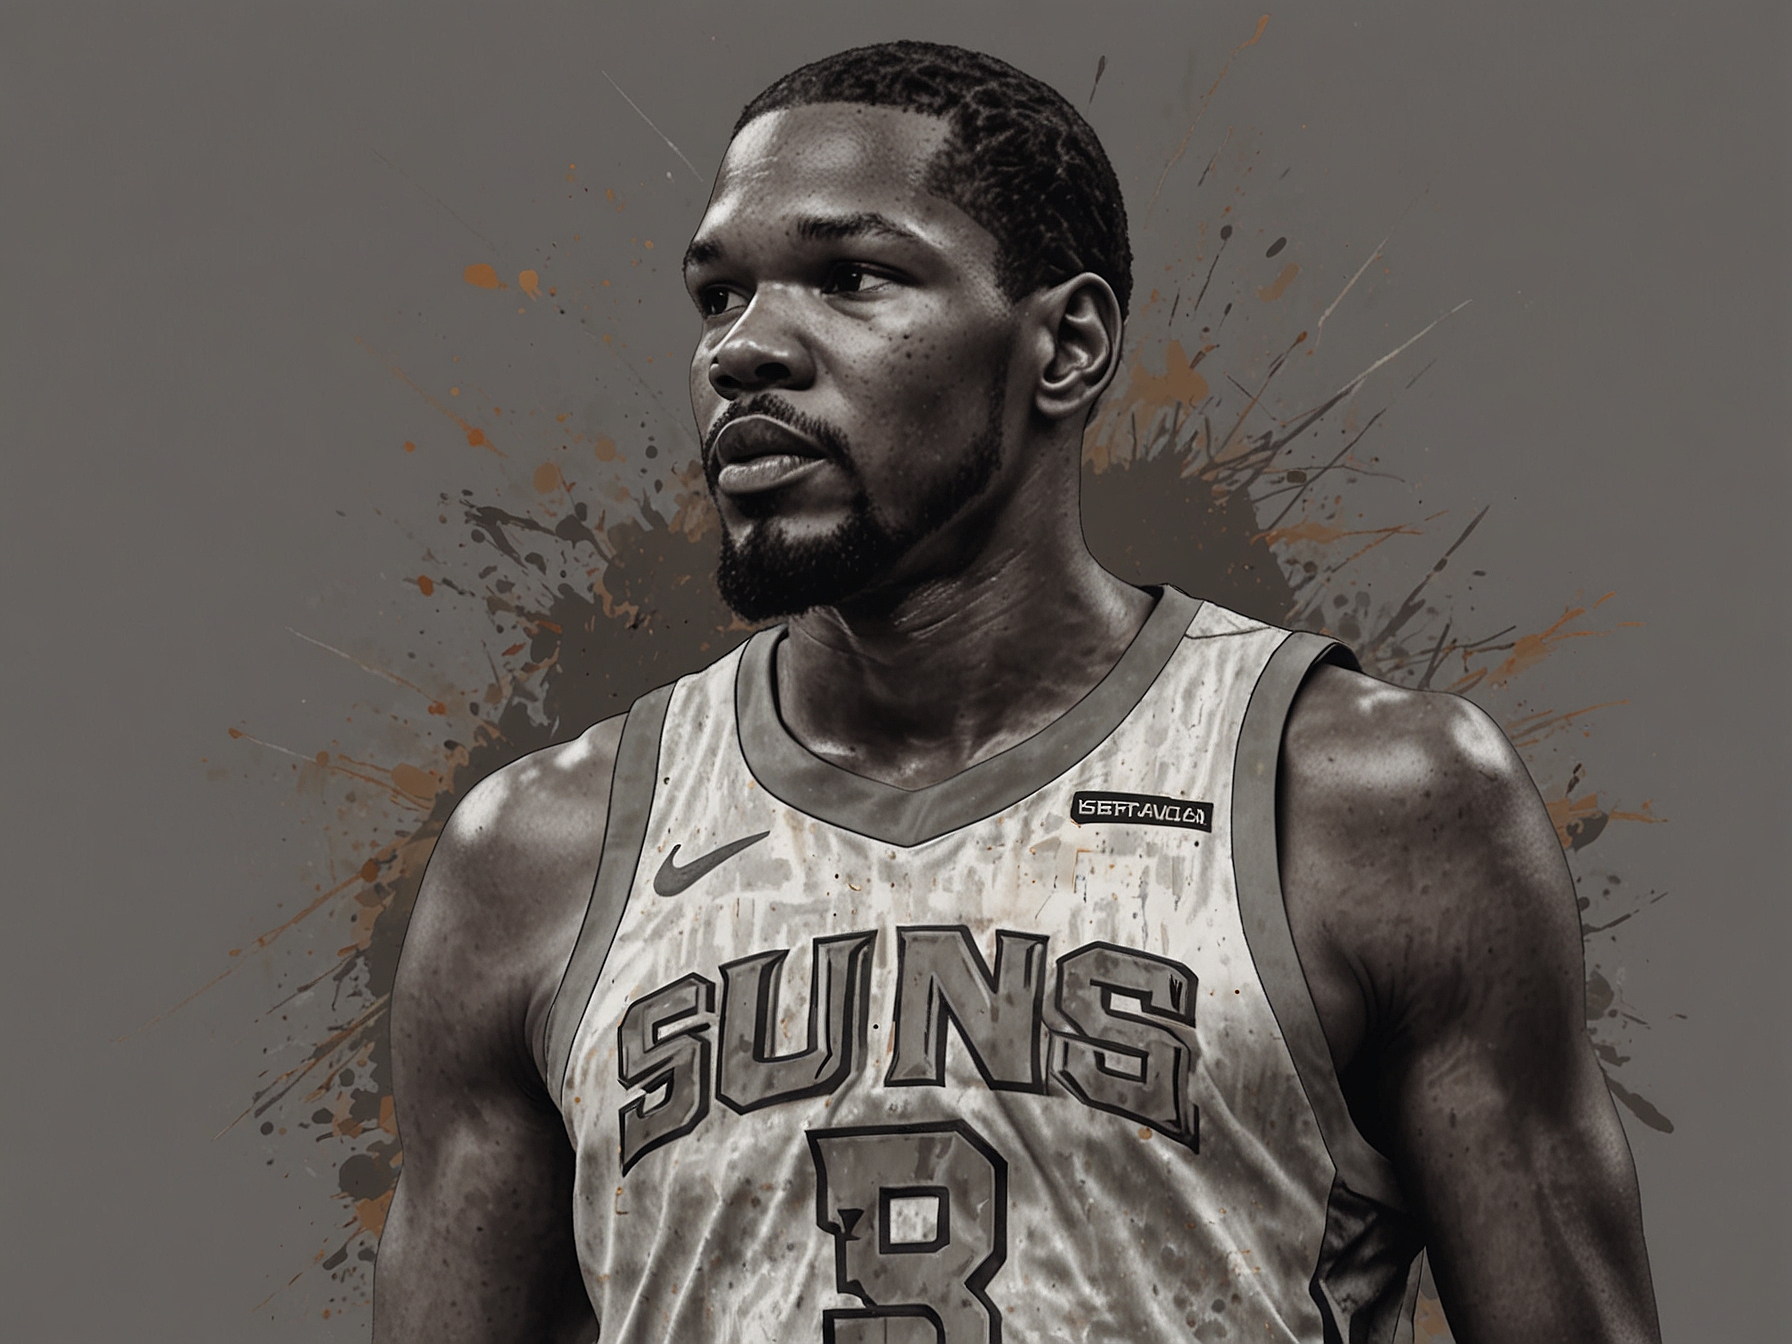 Kevin Durant in a Phoenix Suns jersey, making a powerful move on the court, symbolizing his integral role and the team's commitment to him for upcoming seasons.